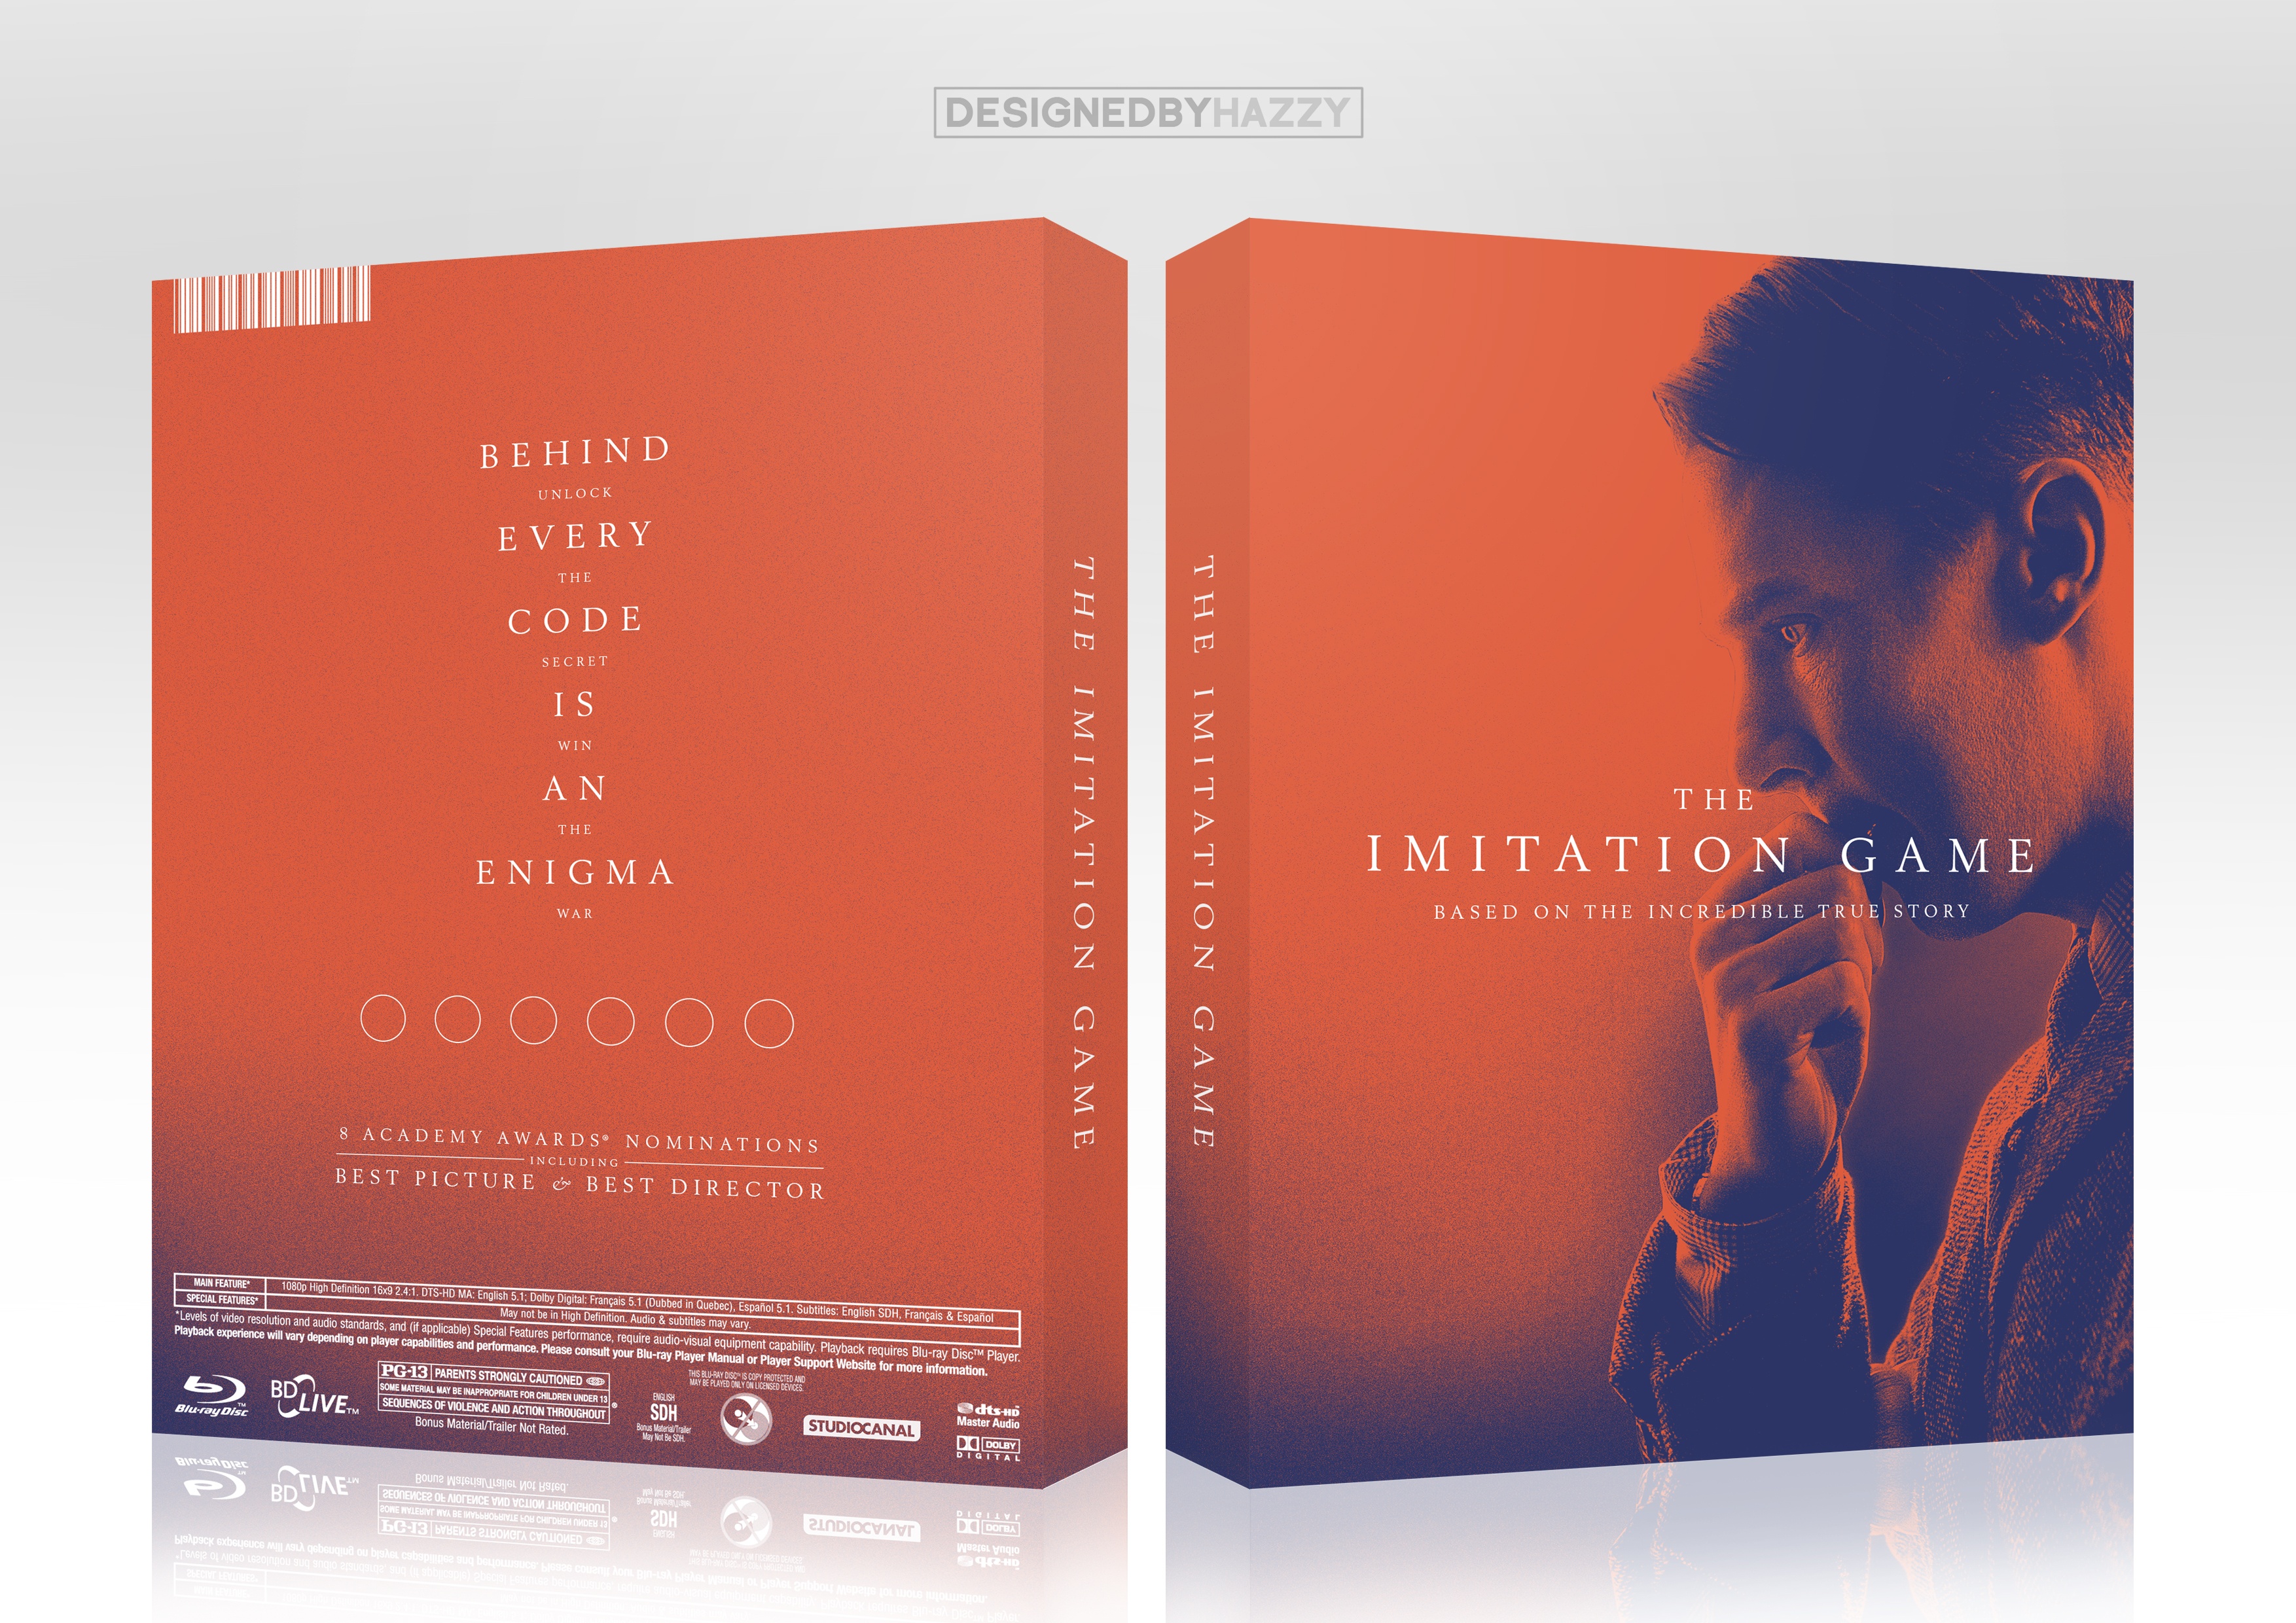 The Imitation Game box cover